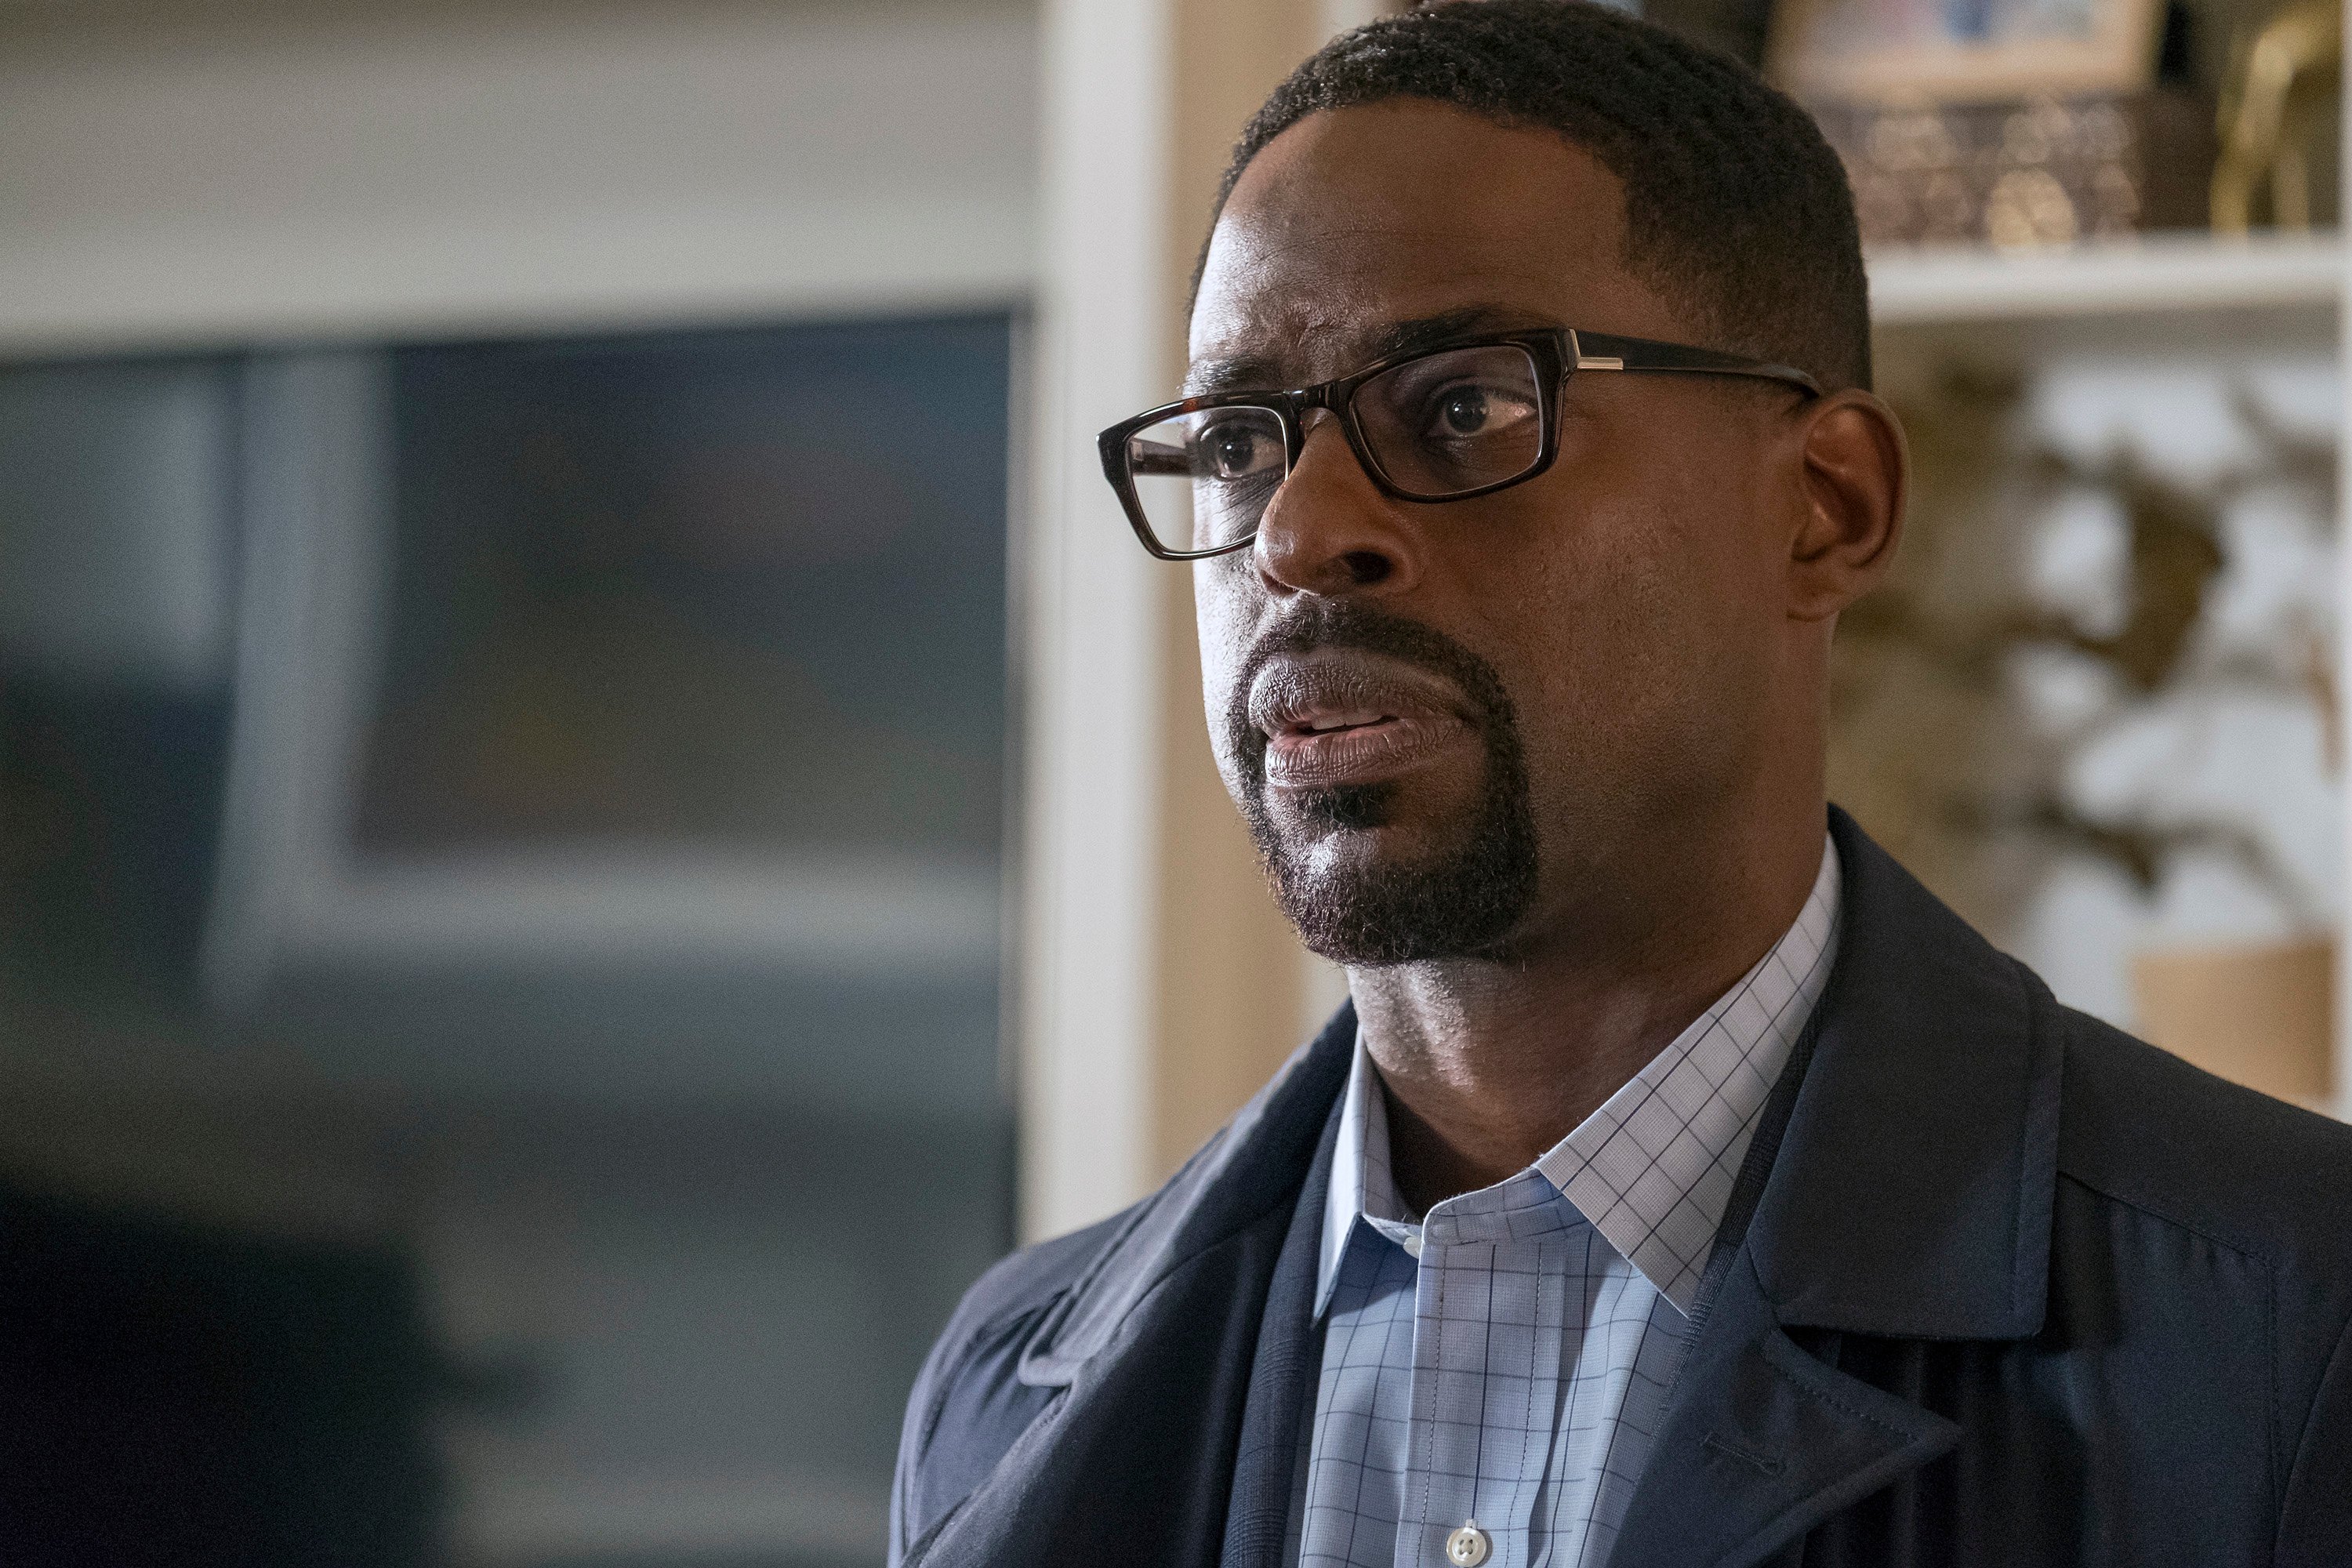 'This Is Us' Season 6 actor Sterling K. Brown, who will star in the series finale, wears a dark gray coat over a white checkered button-up shirt and a pair of black glasses as his character, Randall Pearson.